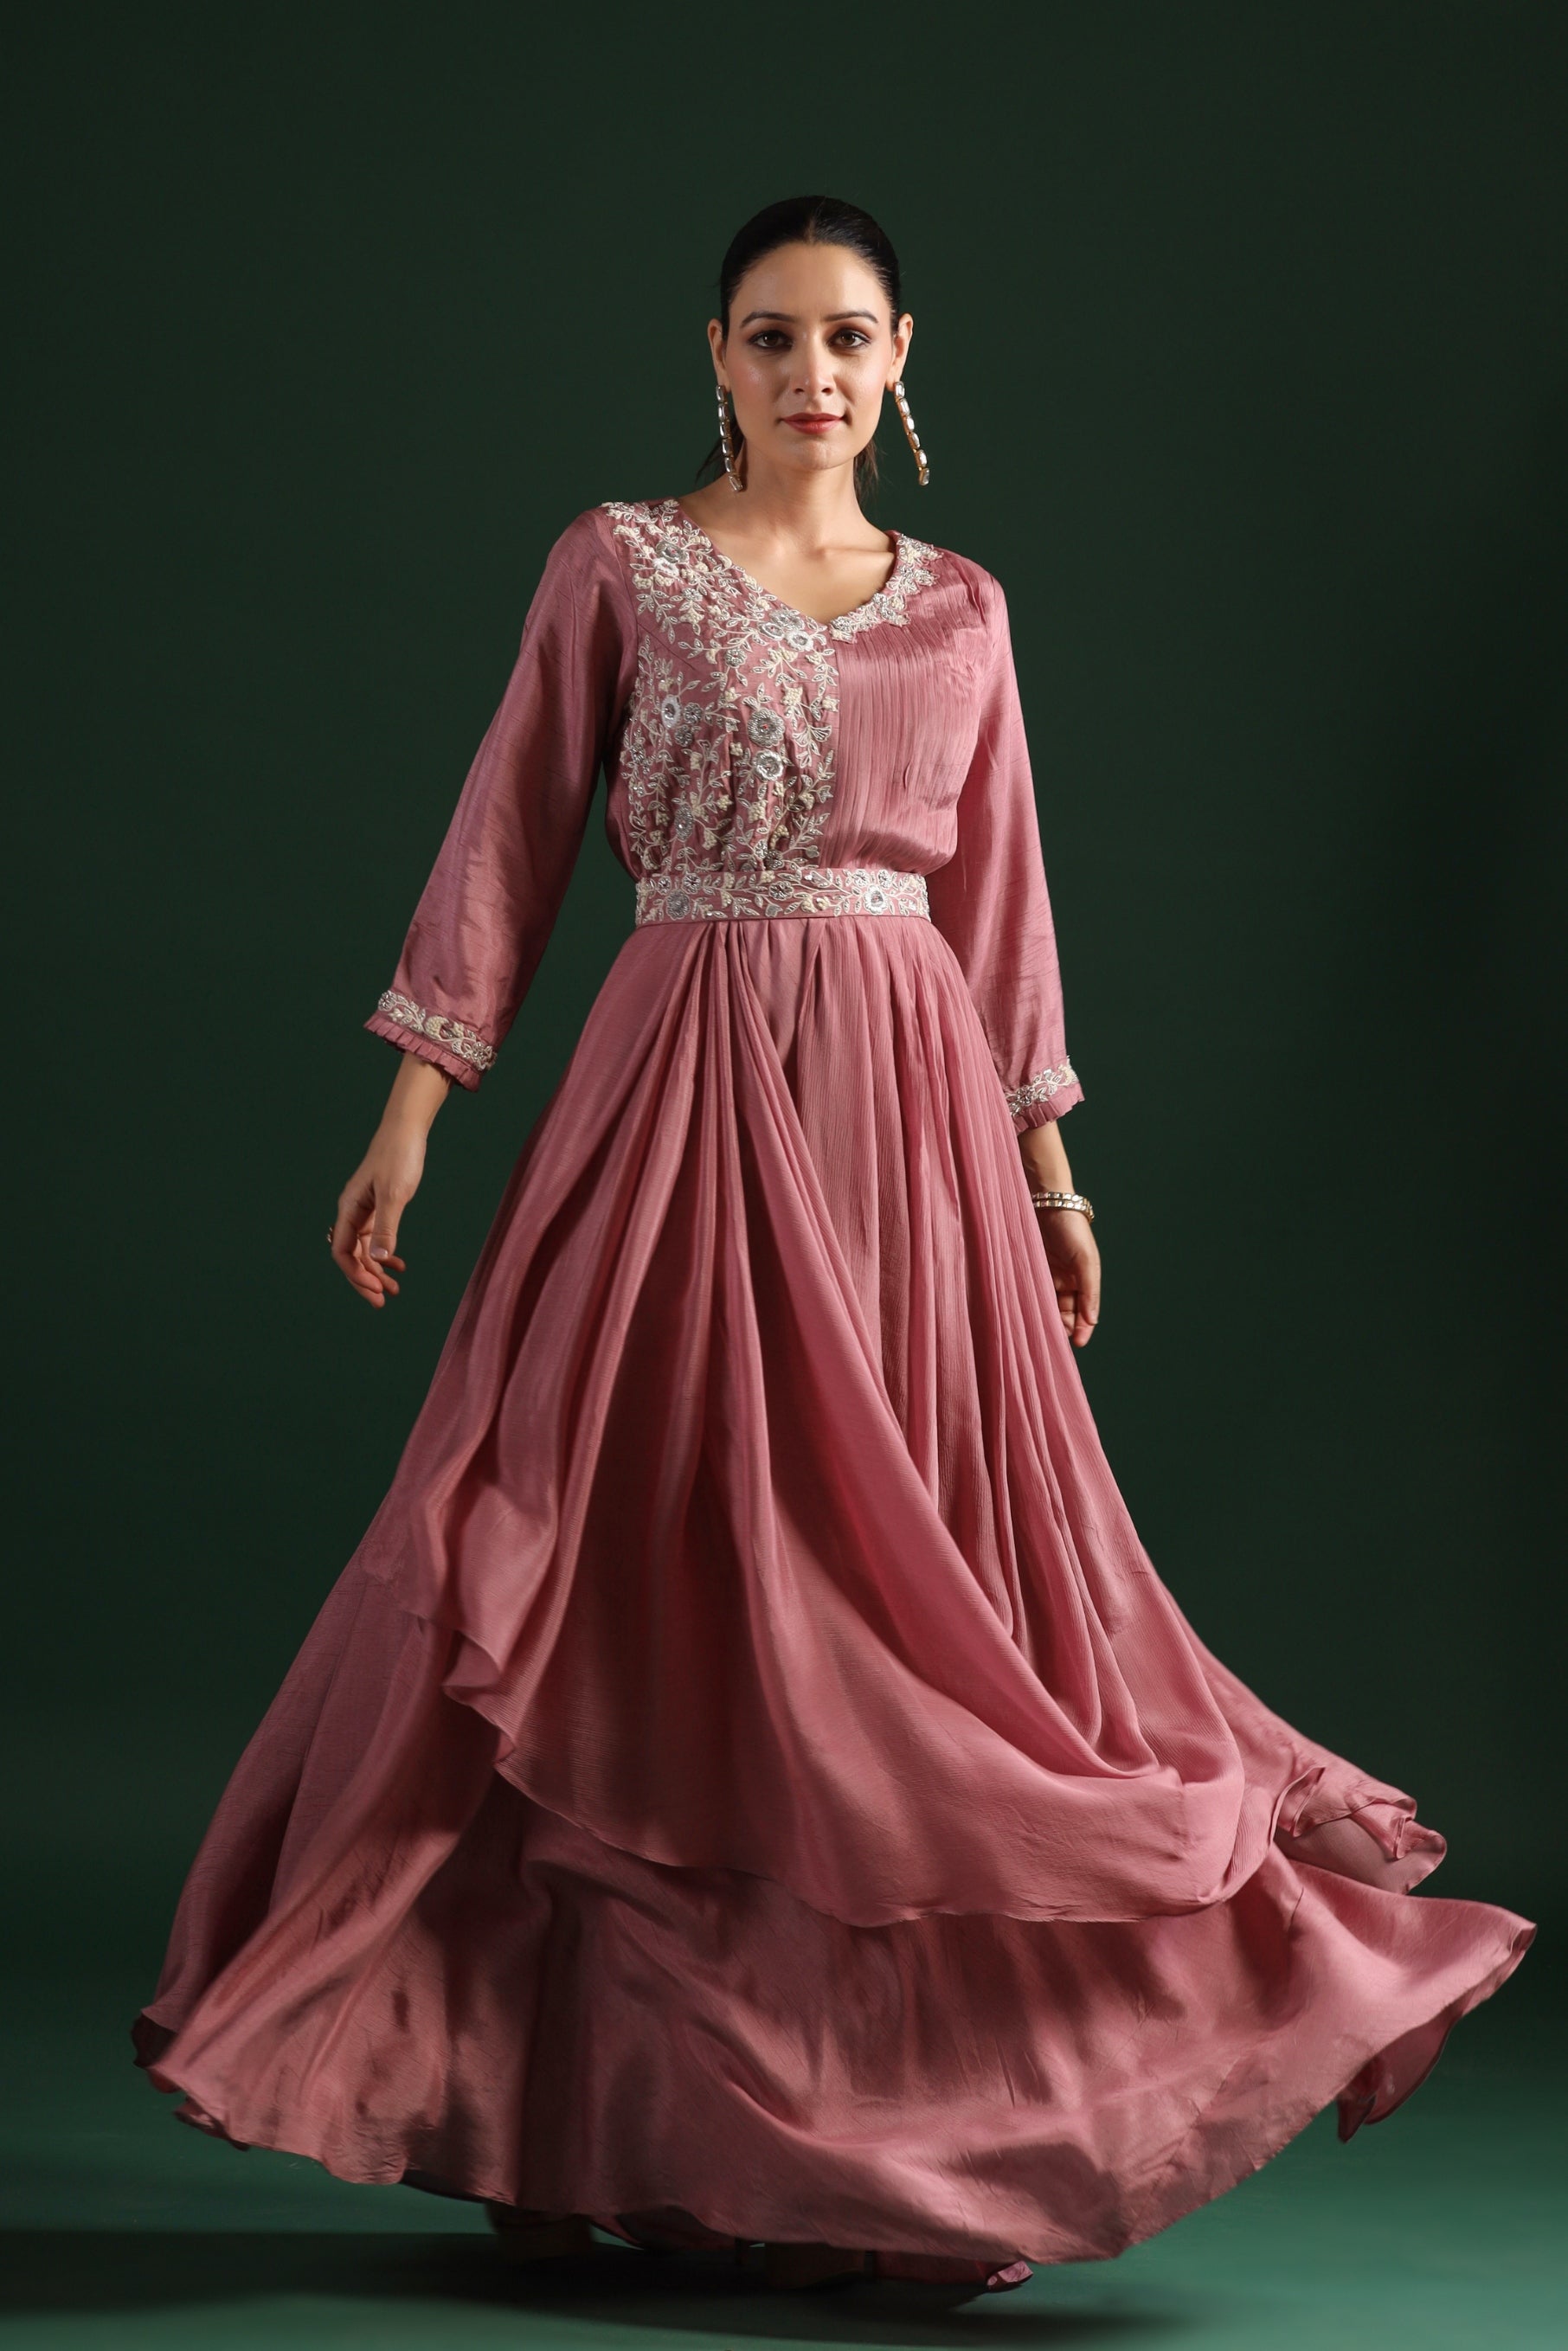 Get the Perfect Indo Western Fusion Look with Our Collection of Dresses -  Pratap Sons - Medium